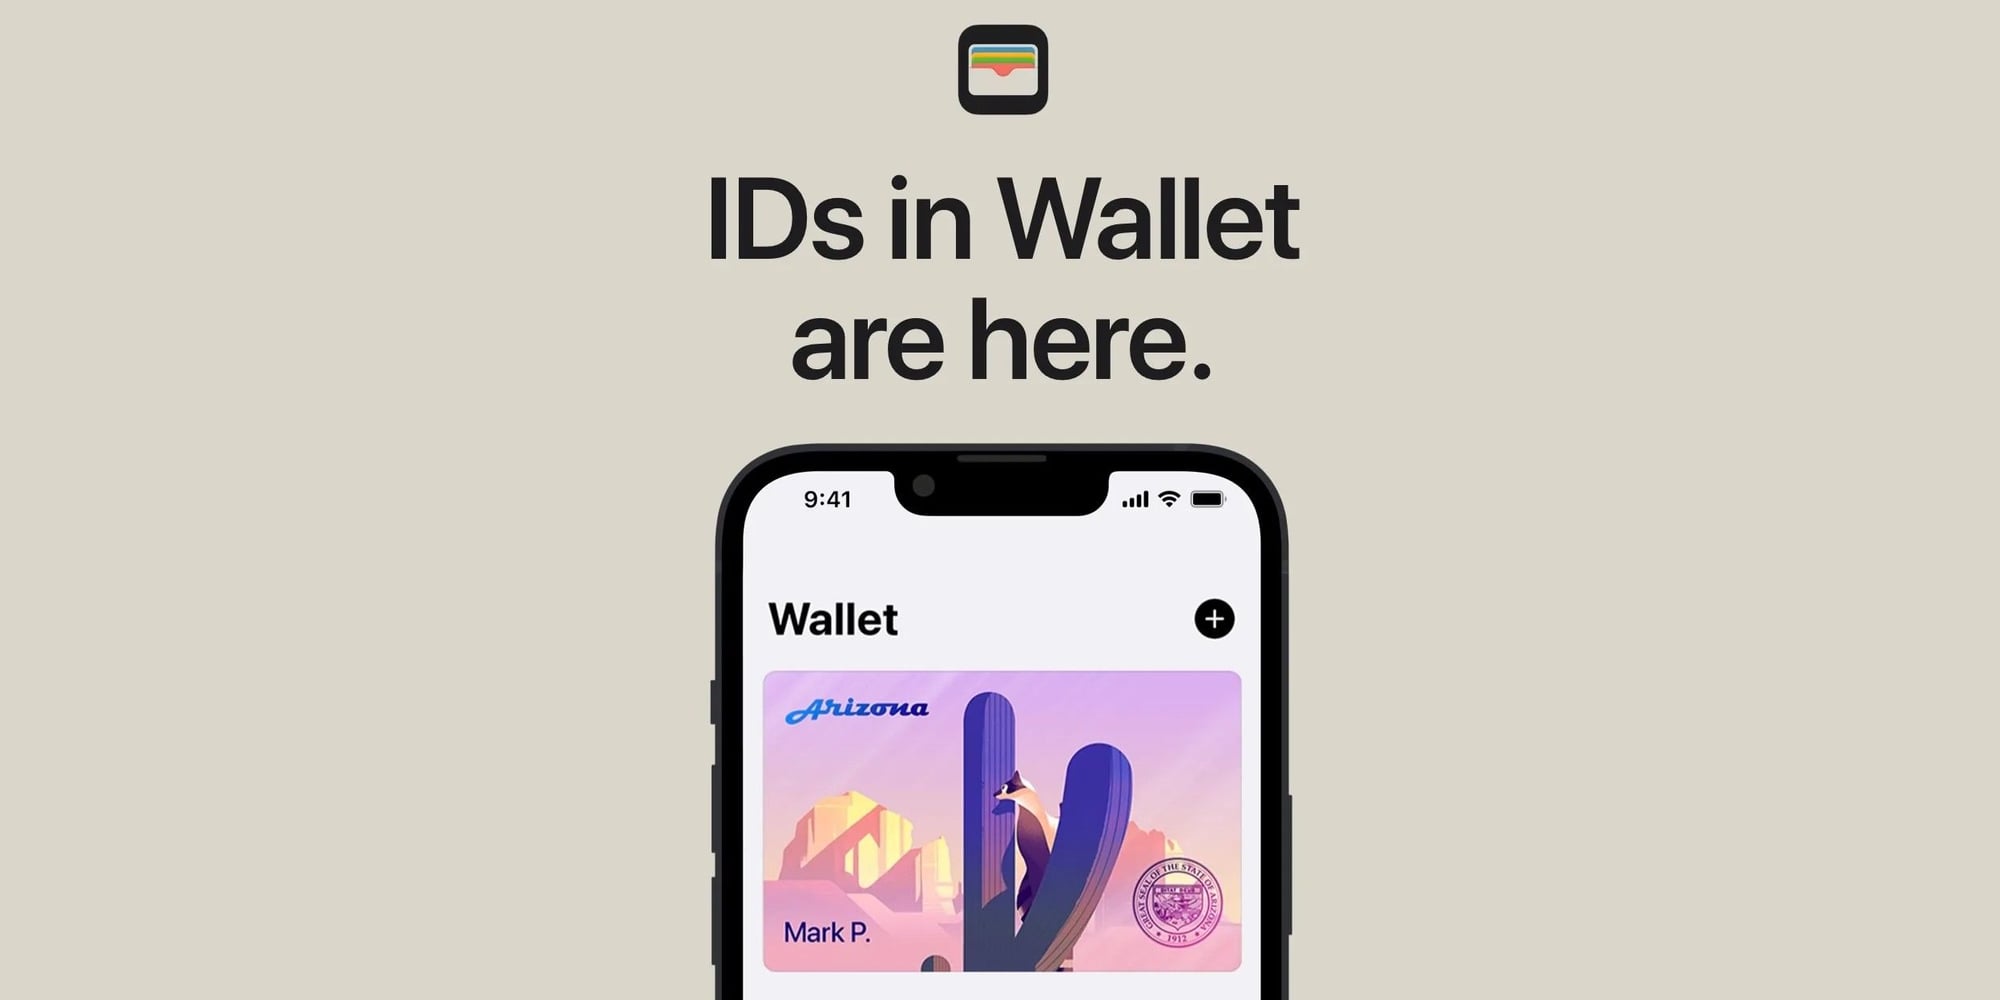 Official Apple announcement of the new IDs in Wallet feature.